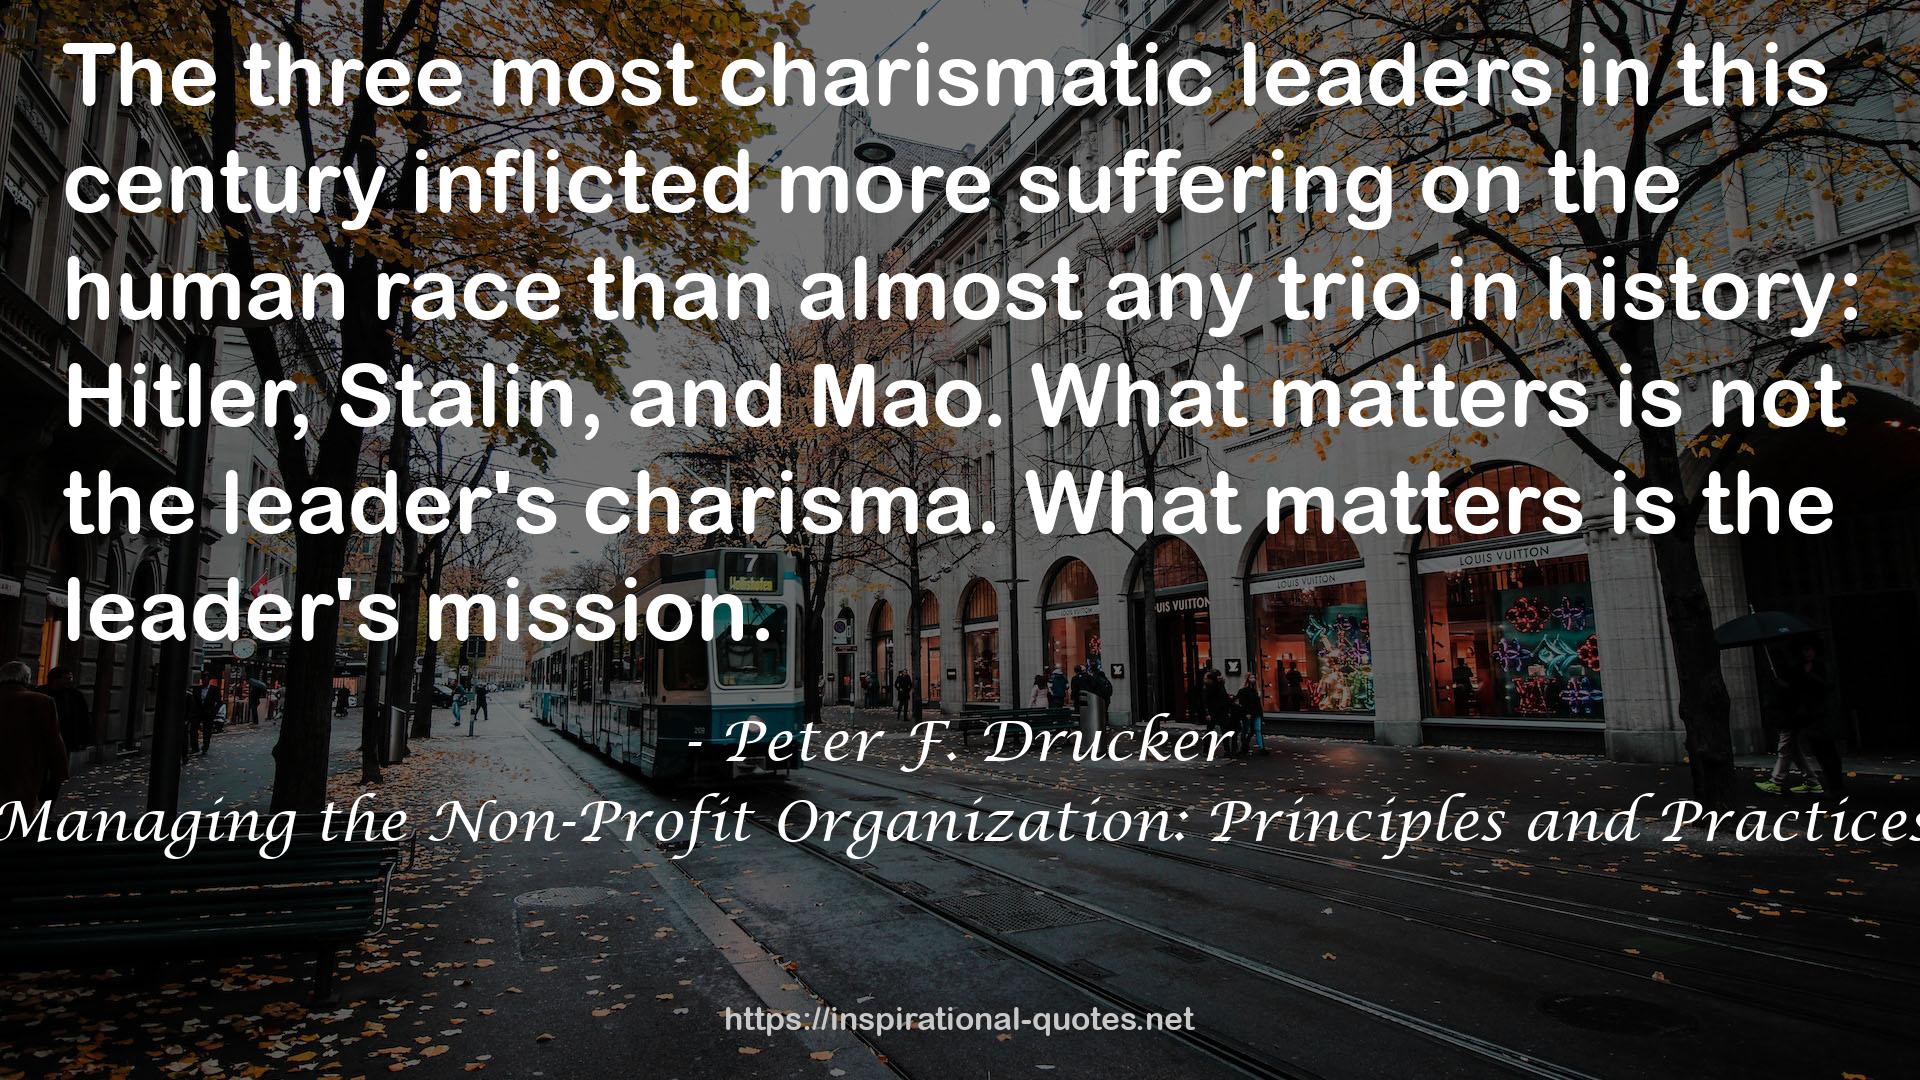 Managing the Non-Profit Organization: Principles and Practices QUOTES